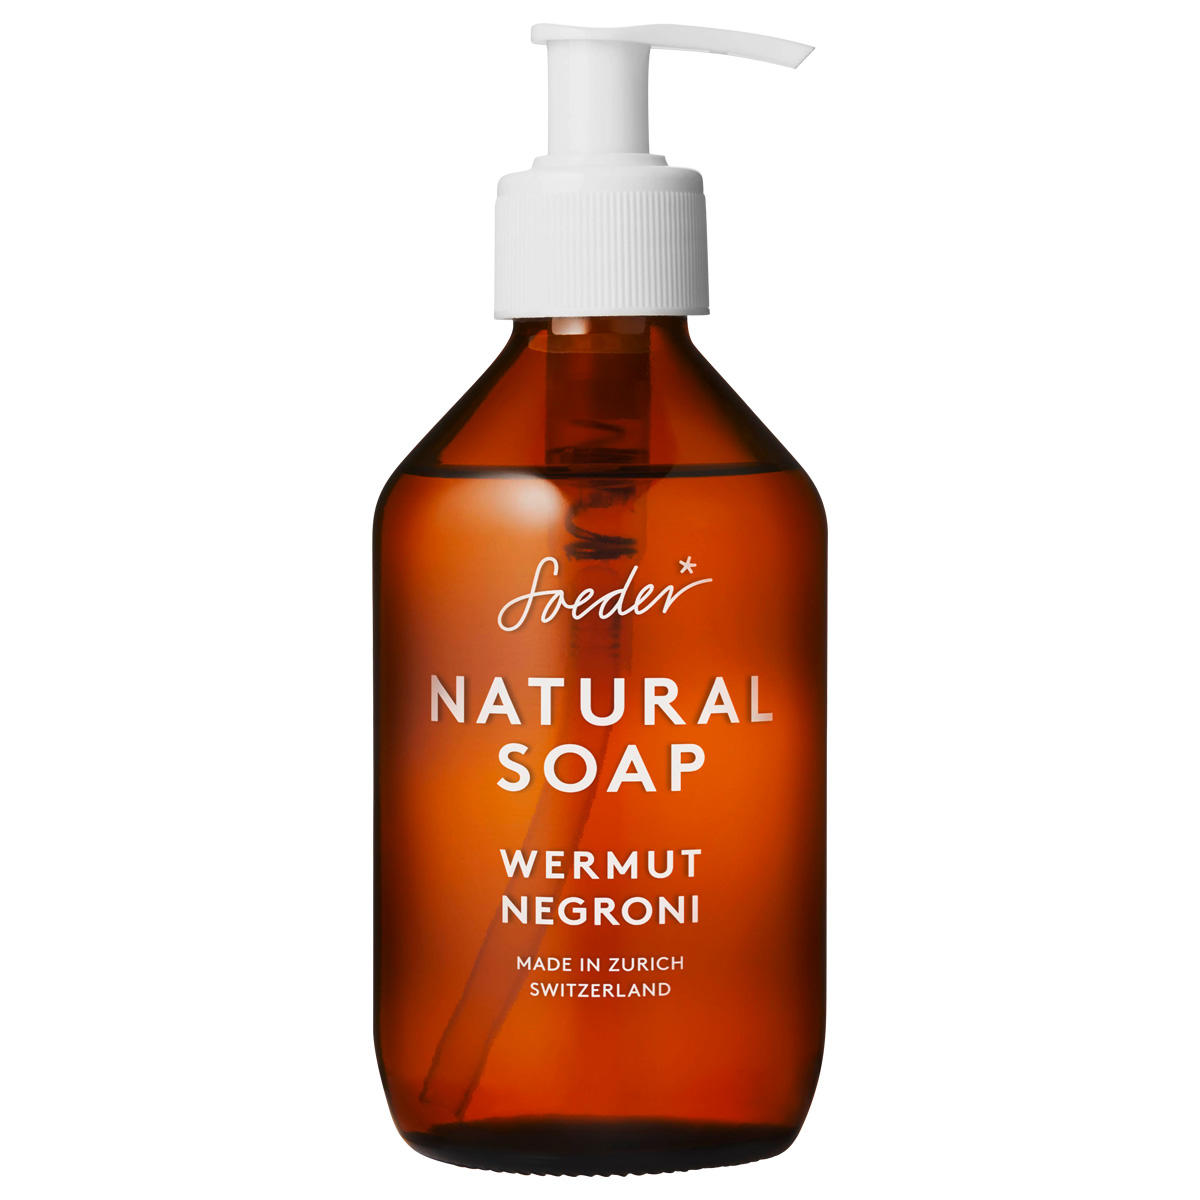 Soeder Natural Soap Vermouth Negroni  - 1